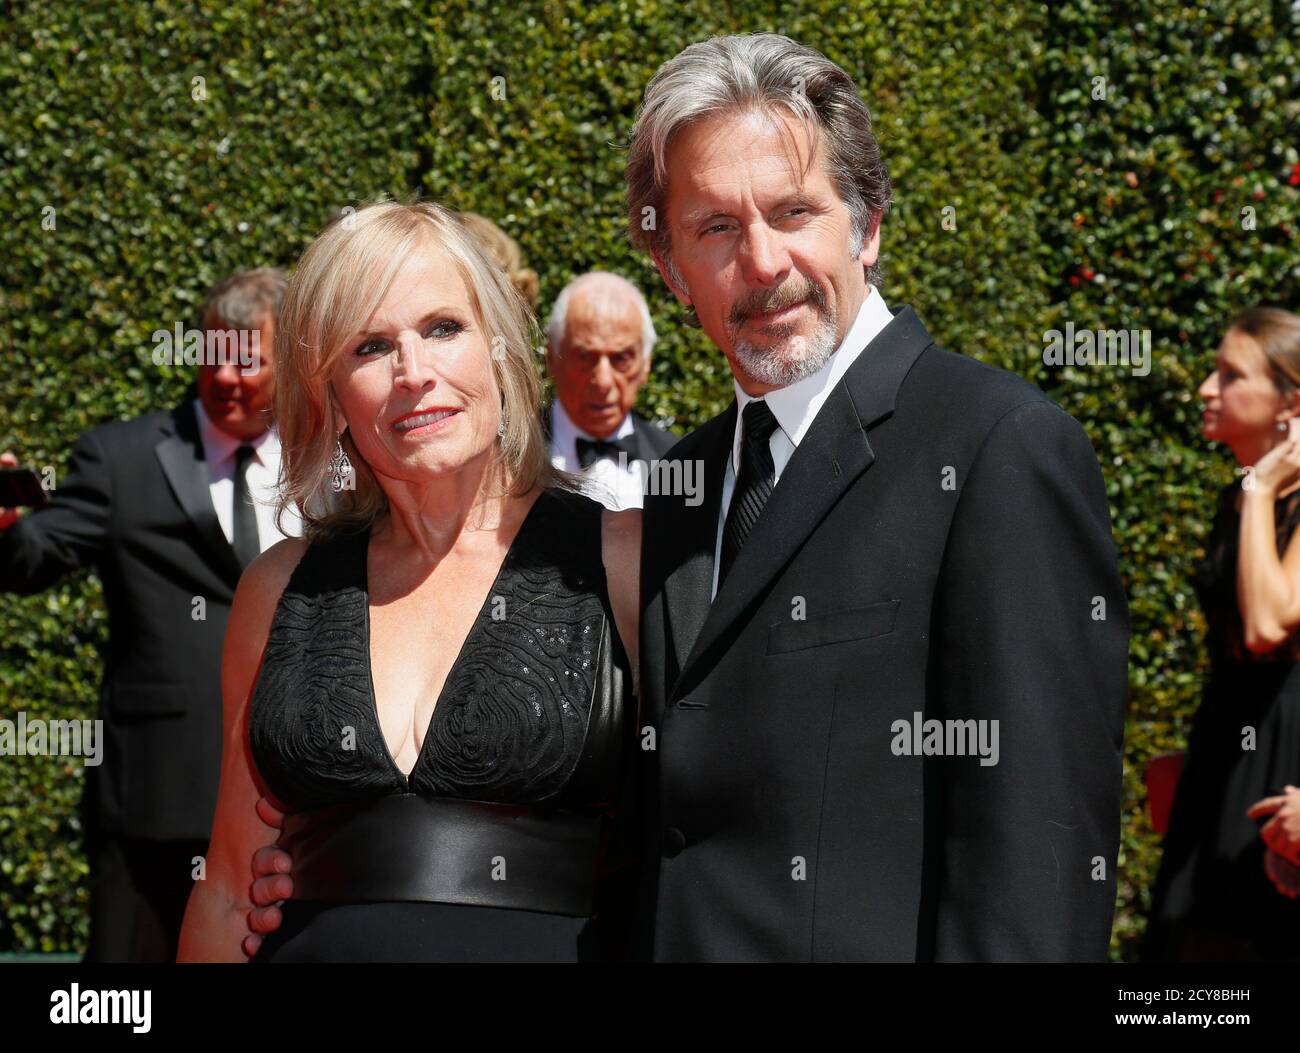 Actor Gary Cole (R) and wife actress Teddi Siddall (L) pose at the 2014 Creative Arts Emmy Awards in Los Angeles, California August 16, 2014.  REUTERS/Danny Moloshok  (UNITED STATES-Tags: ENTERTAINMENT) Stock Photo